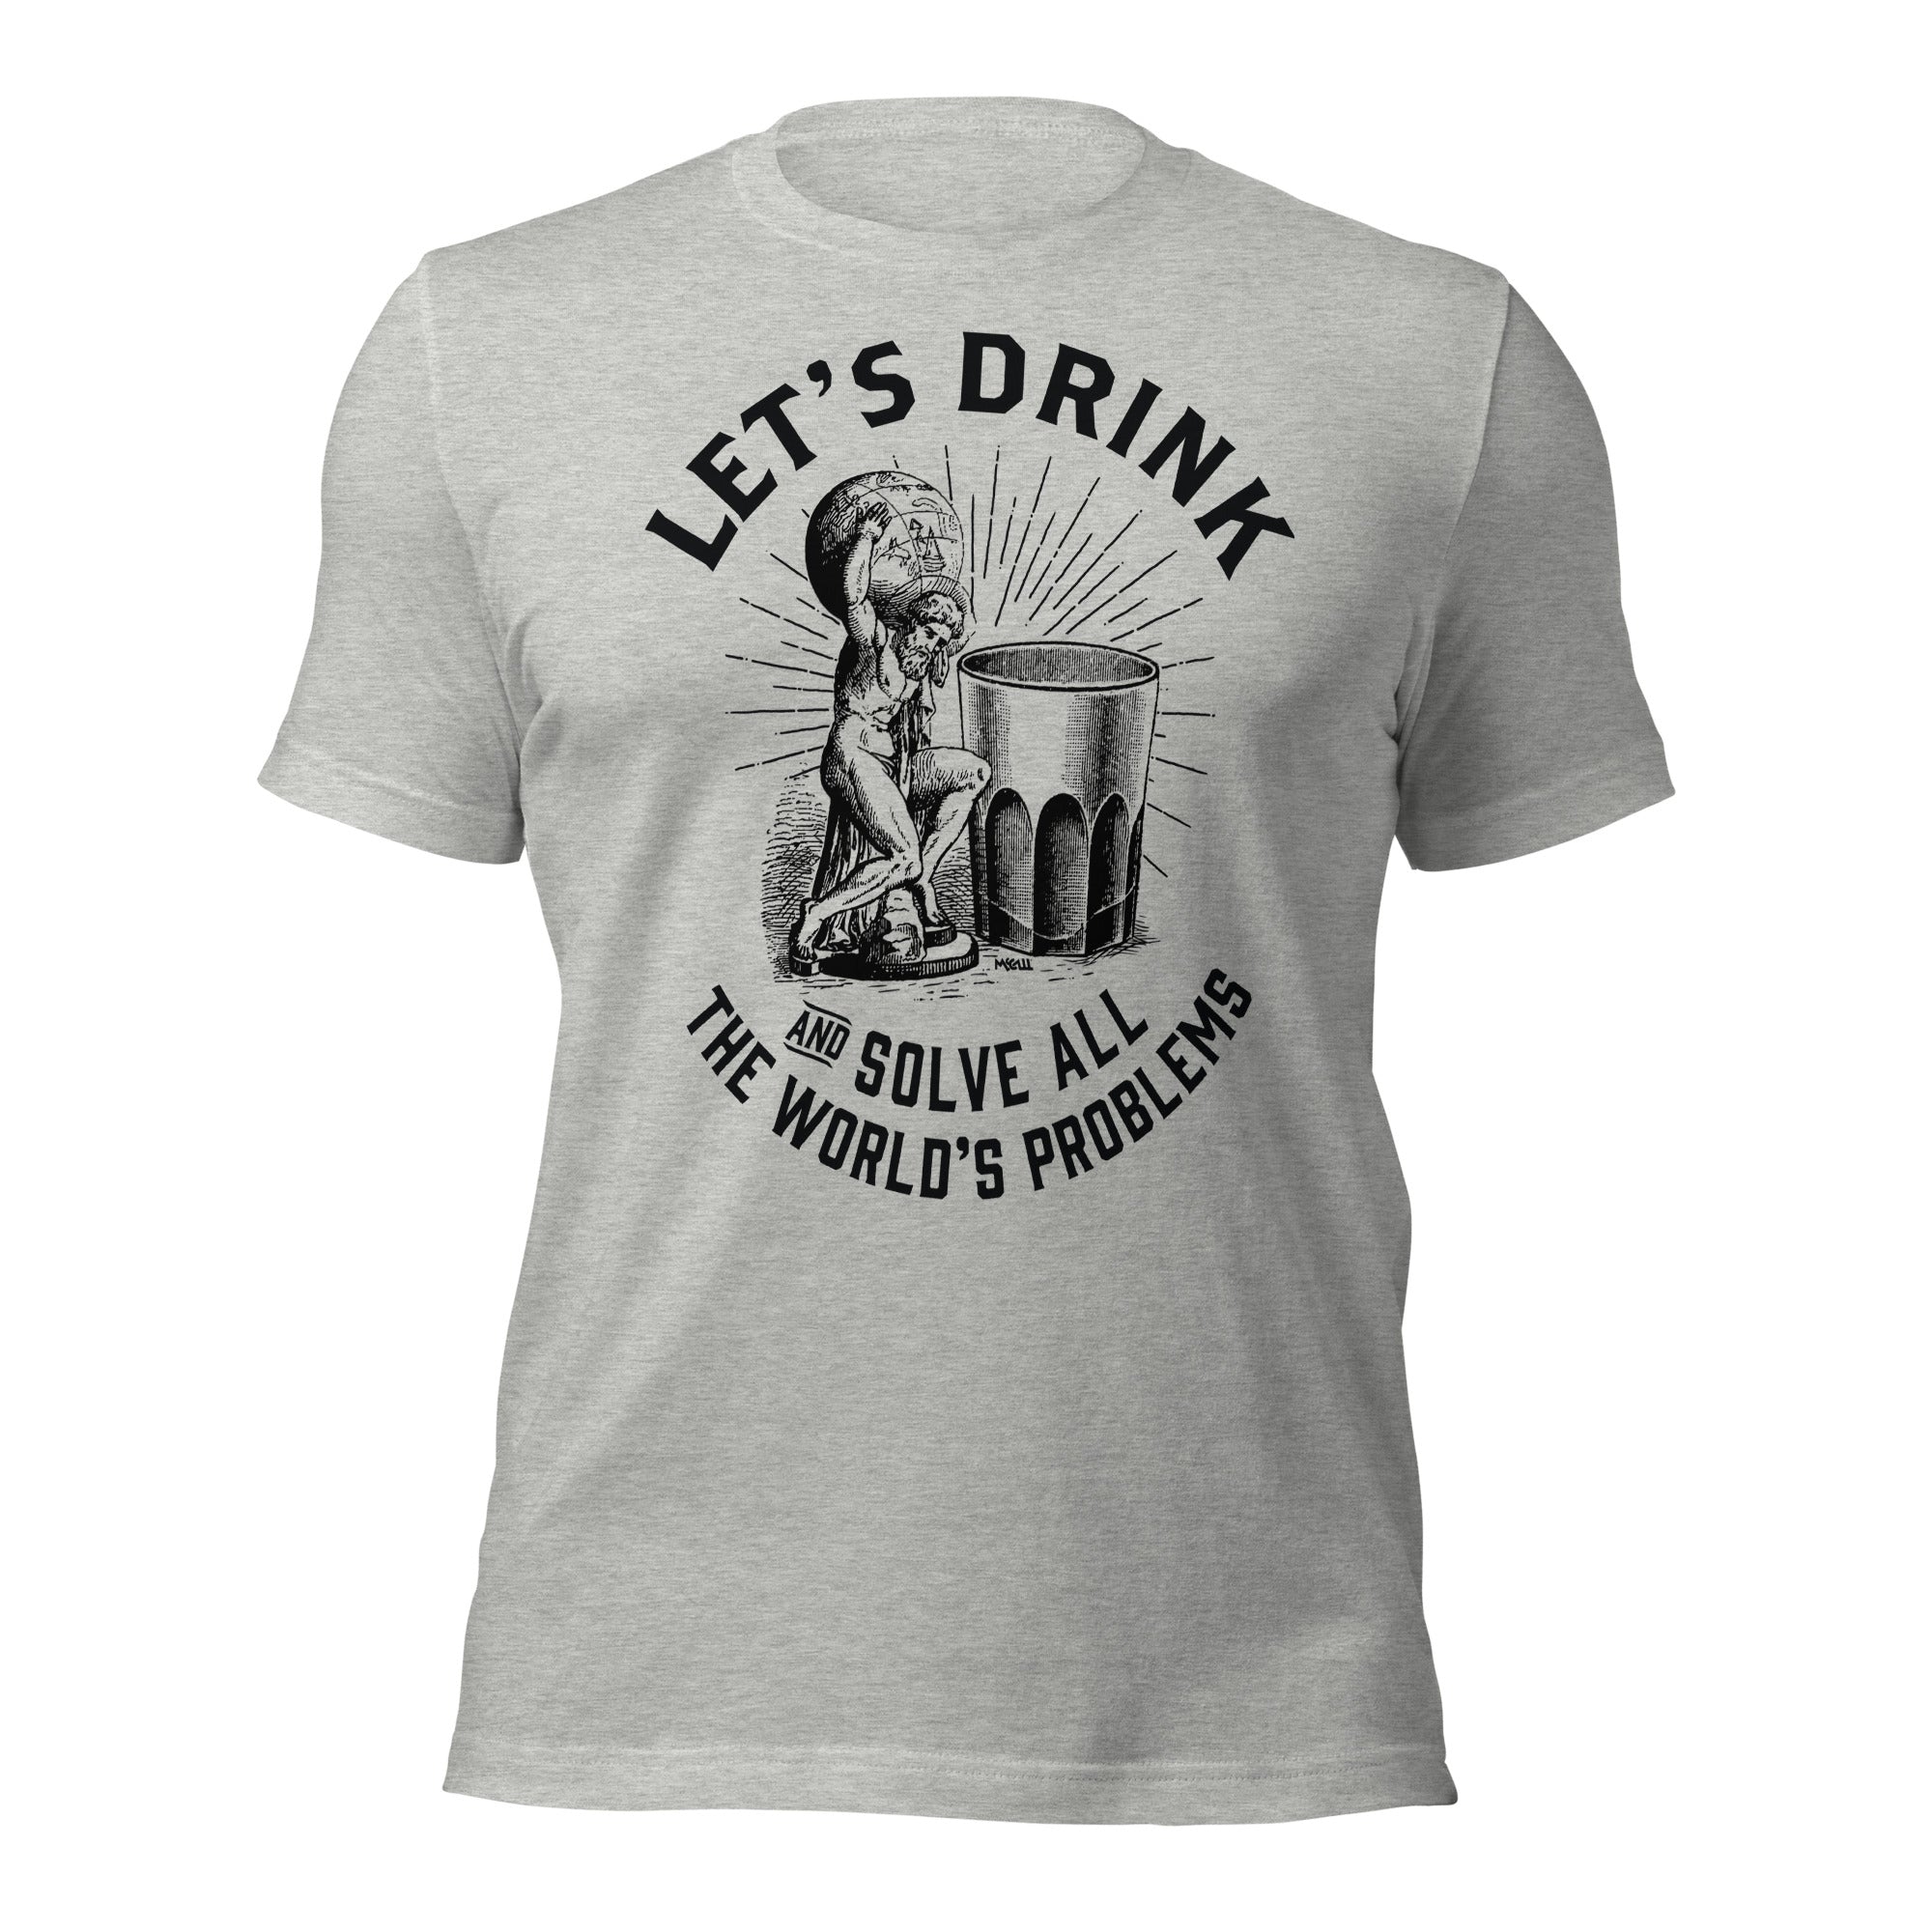 Let's Drink and Solve All The World's Problems Graphic T-Shirt